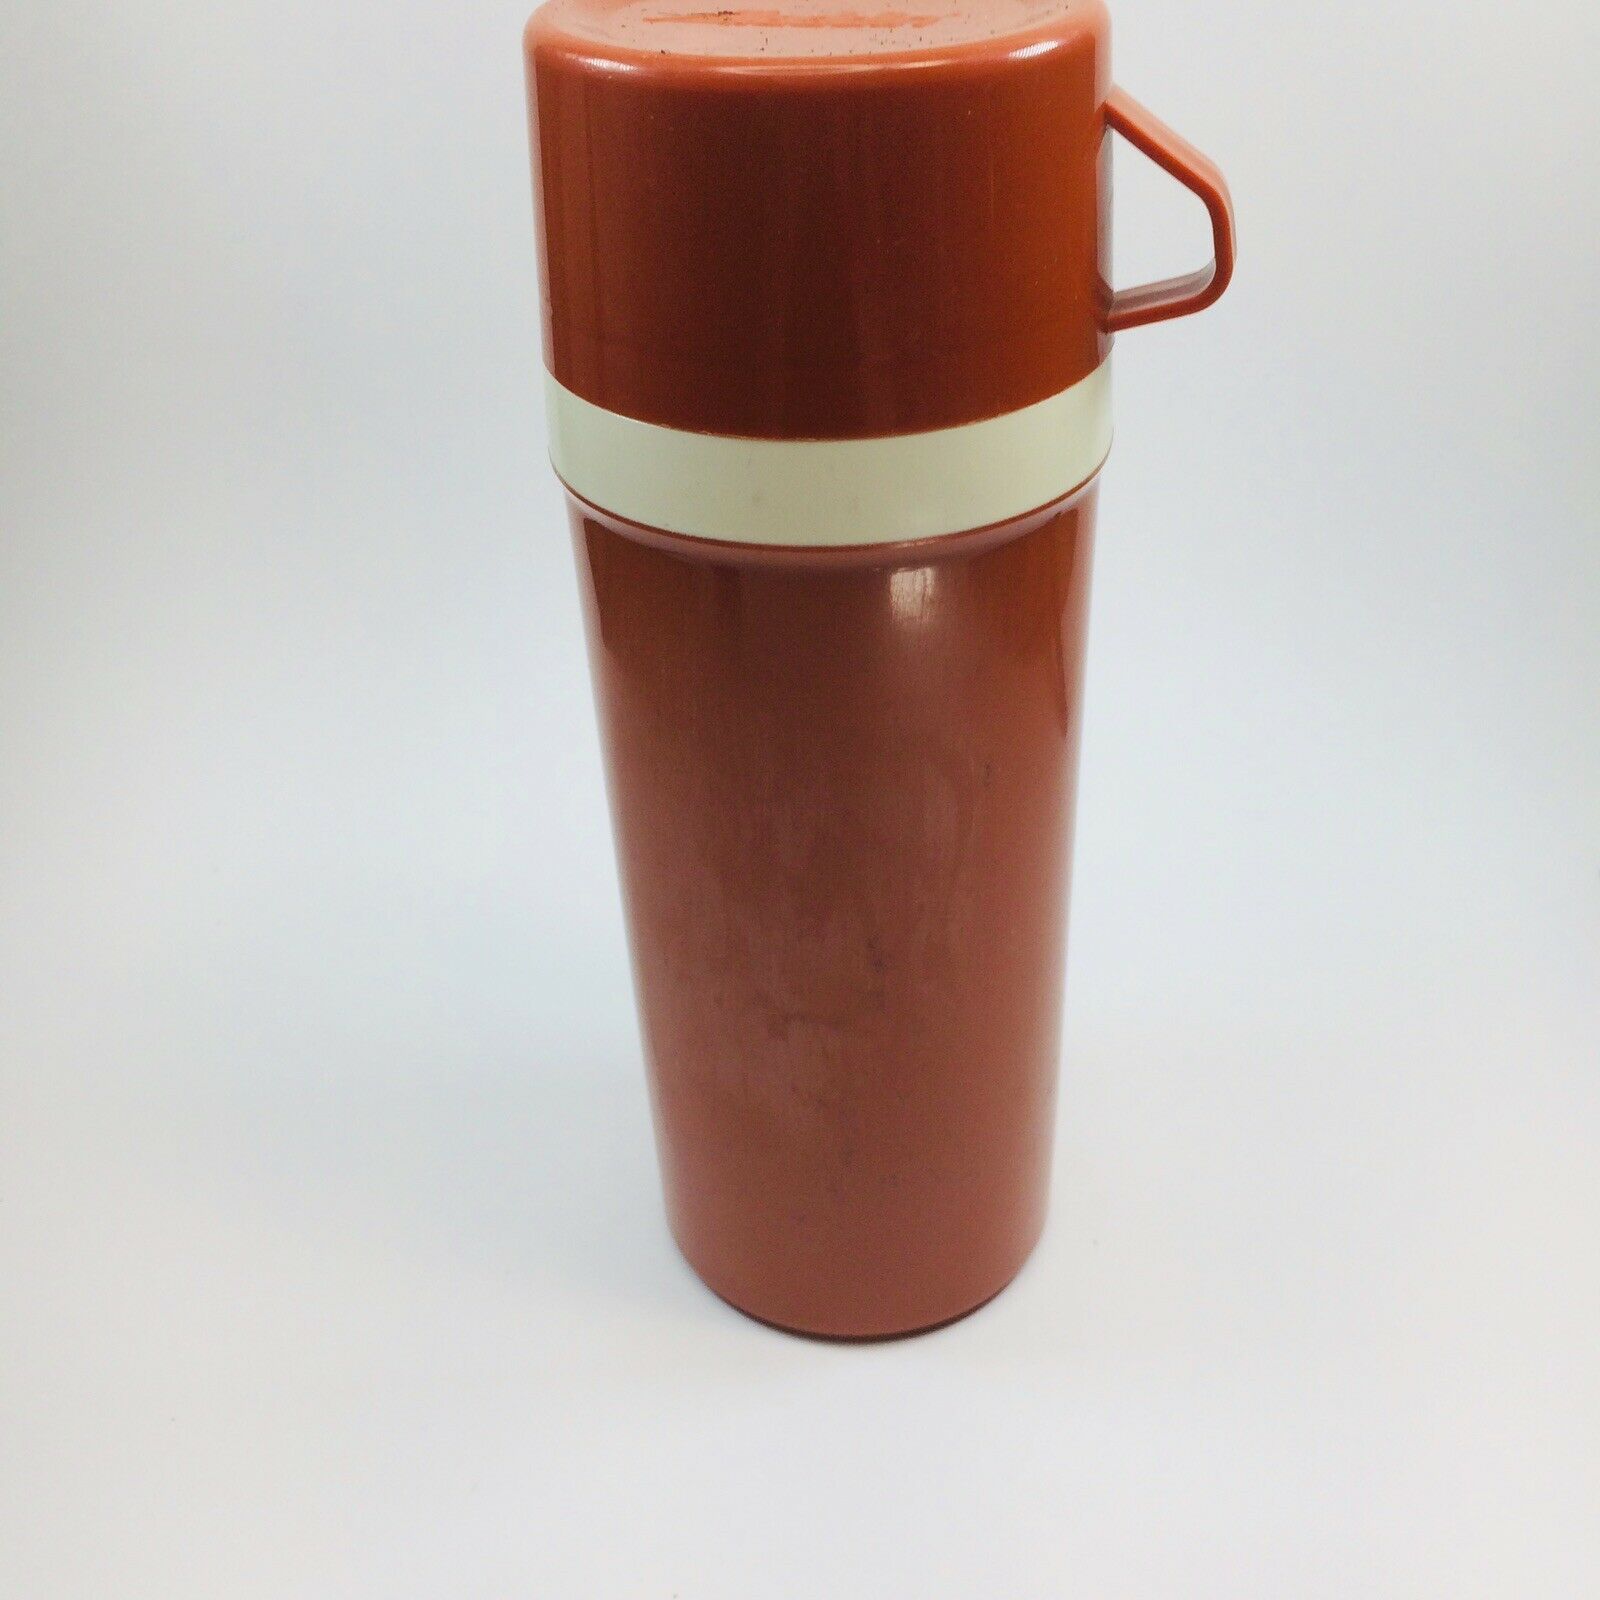 80s Thermos Coffee Butler insulated plastic carafe pitcher in box